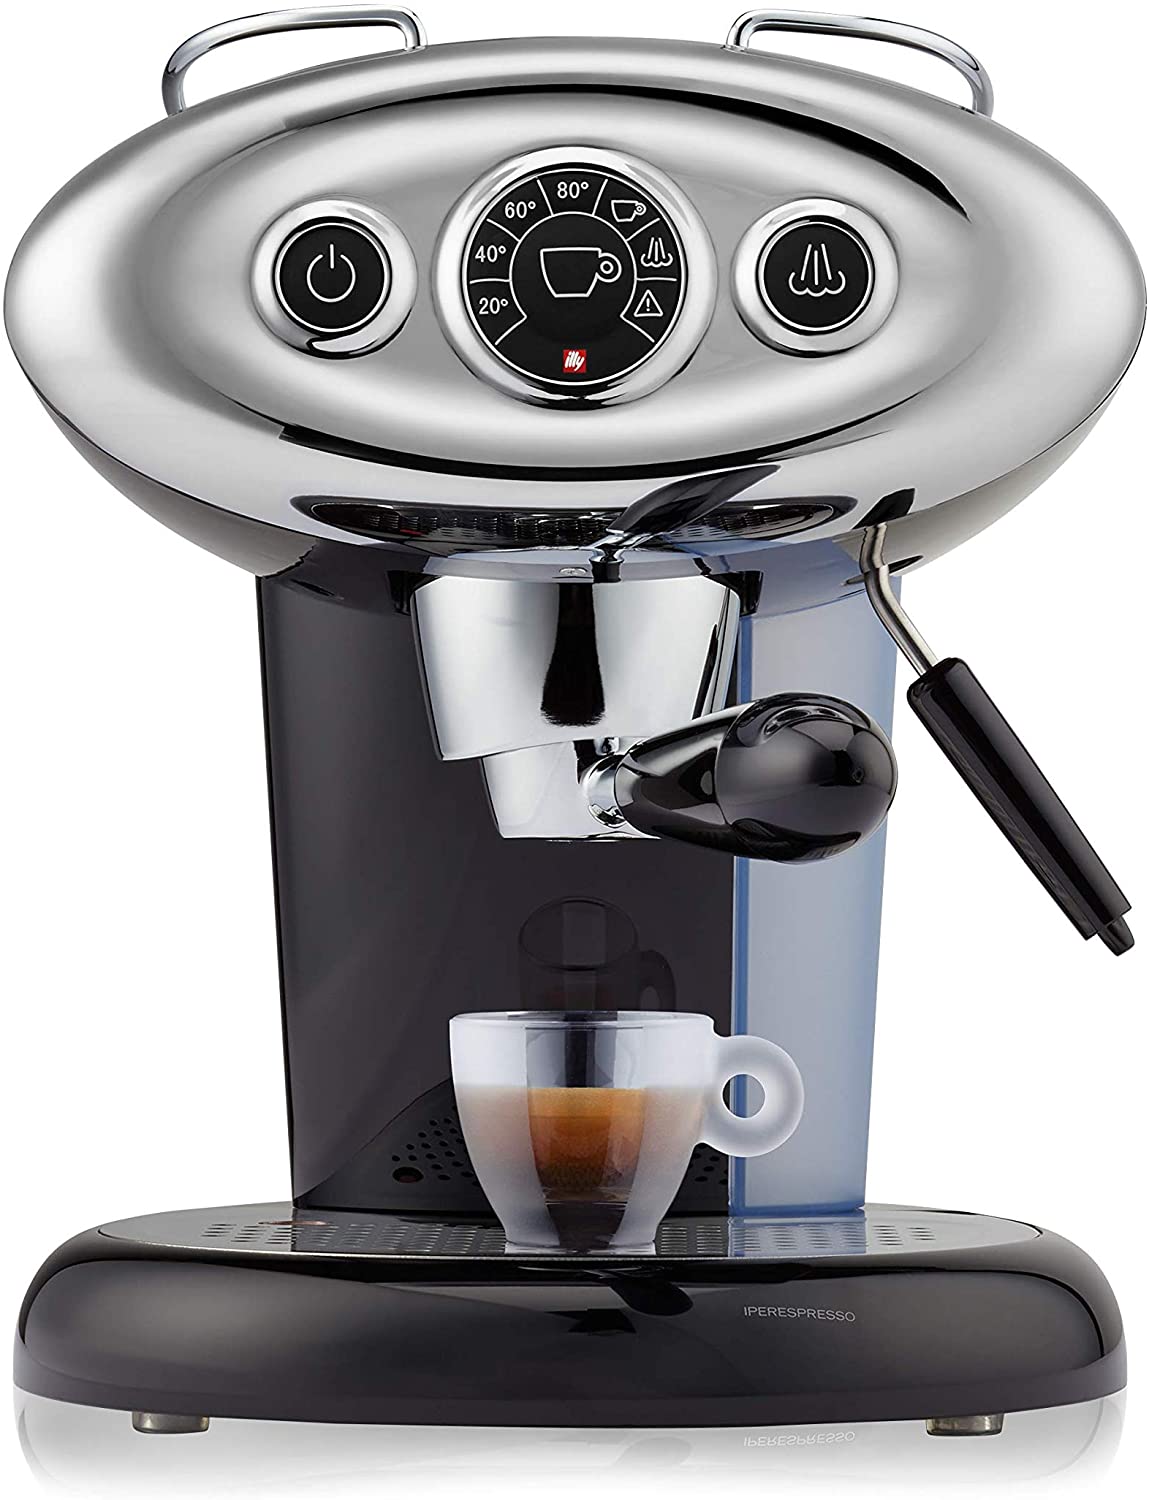 Francis Francis for Illy X7.1 Expresso Coffee Maker, Black